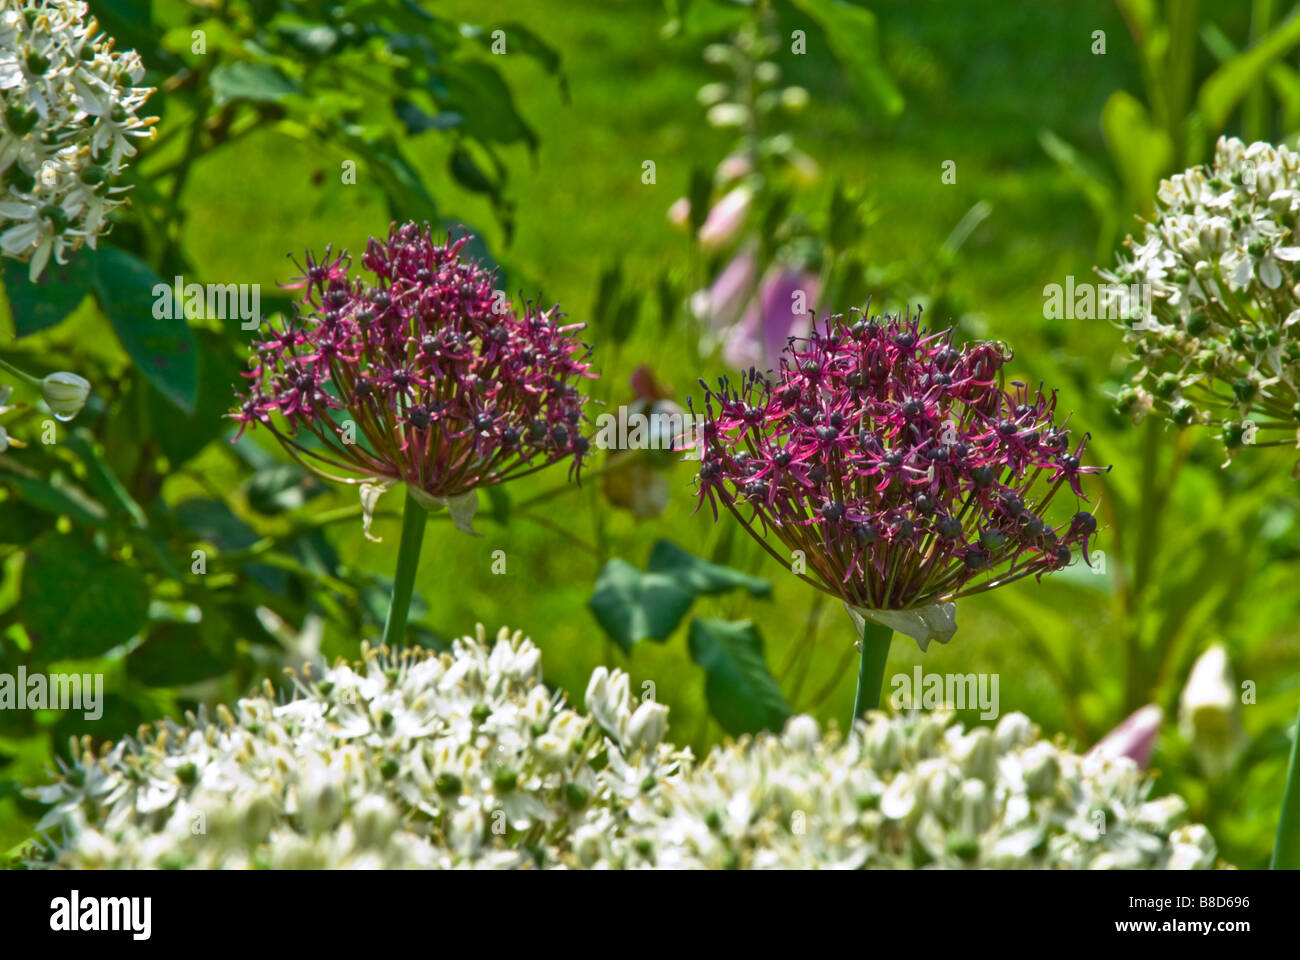 Allium nigrum and Allium purpureum bloom together in an early summer garden for a 'black and white' color scheme.. Stock Photo